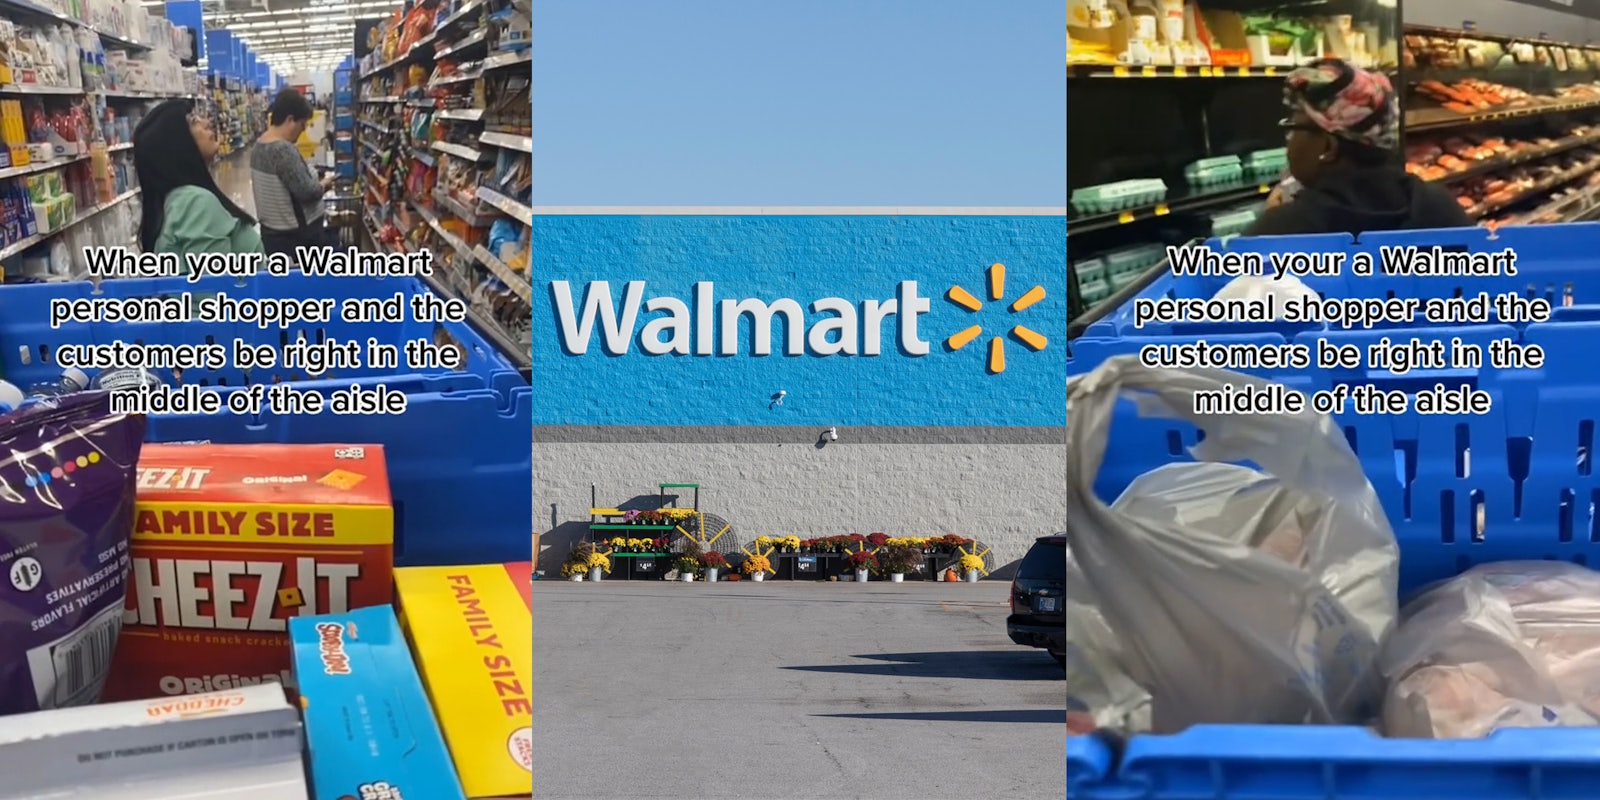 Walmart personal shopper in aisle with customers in front with caption 'When your a Walmart personal shopper and the customers be right in the middle of the aisle' (l) Walmart building with sign and blue sky (c) Walmart personal shopper in aisle with customer in front with caption 'When your a Walmart personal shopper and the customers be right in the middle of the aisle' (r)